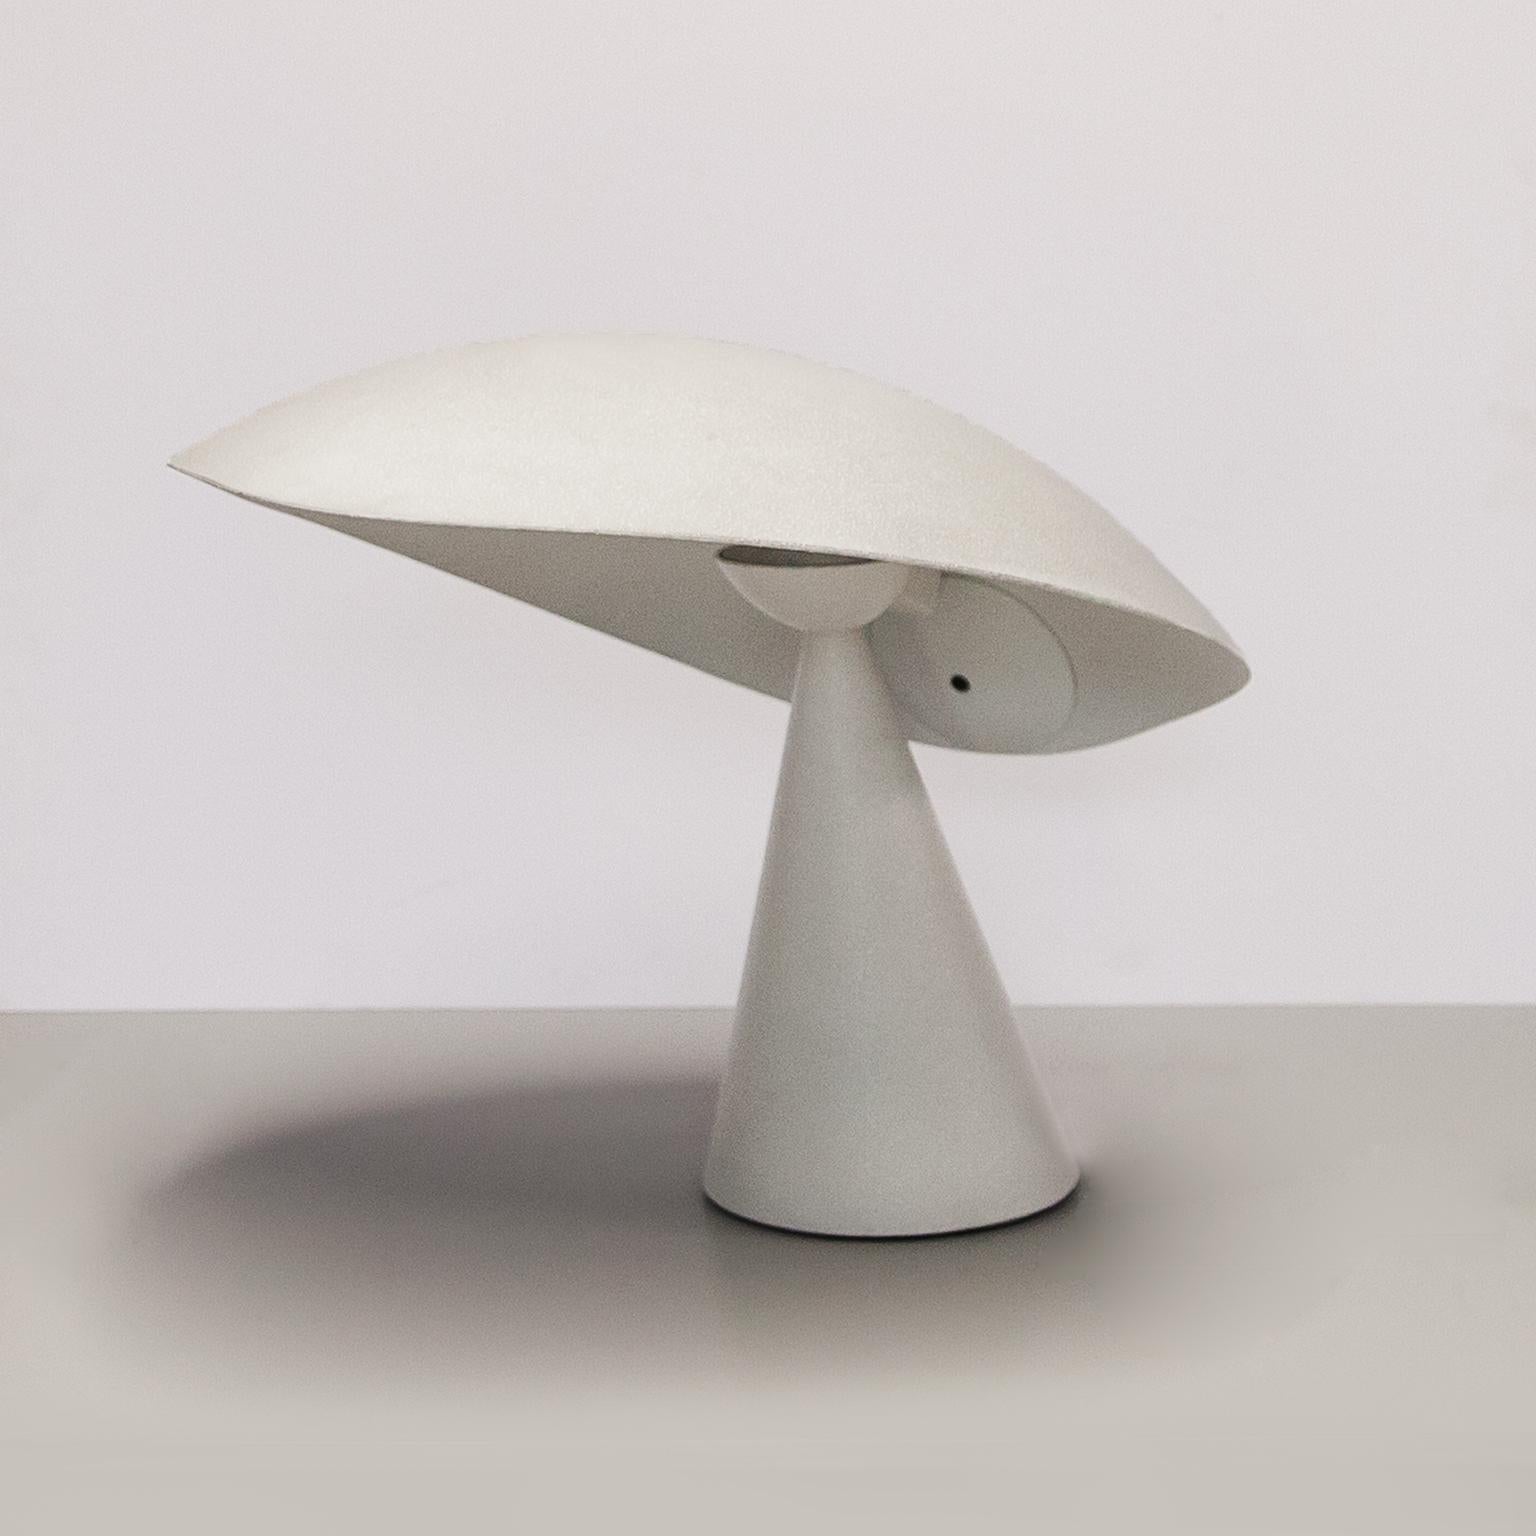 Masayuki Kurokawa designed the Lavinia table lamp with an adjustable construction in white grainy cast and enameled aluminium for Artemide, Milan, 1988. 
Good original vintage condition.

The Lavinia table lamp is an organic sculptural lamp that